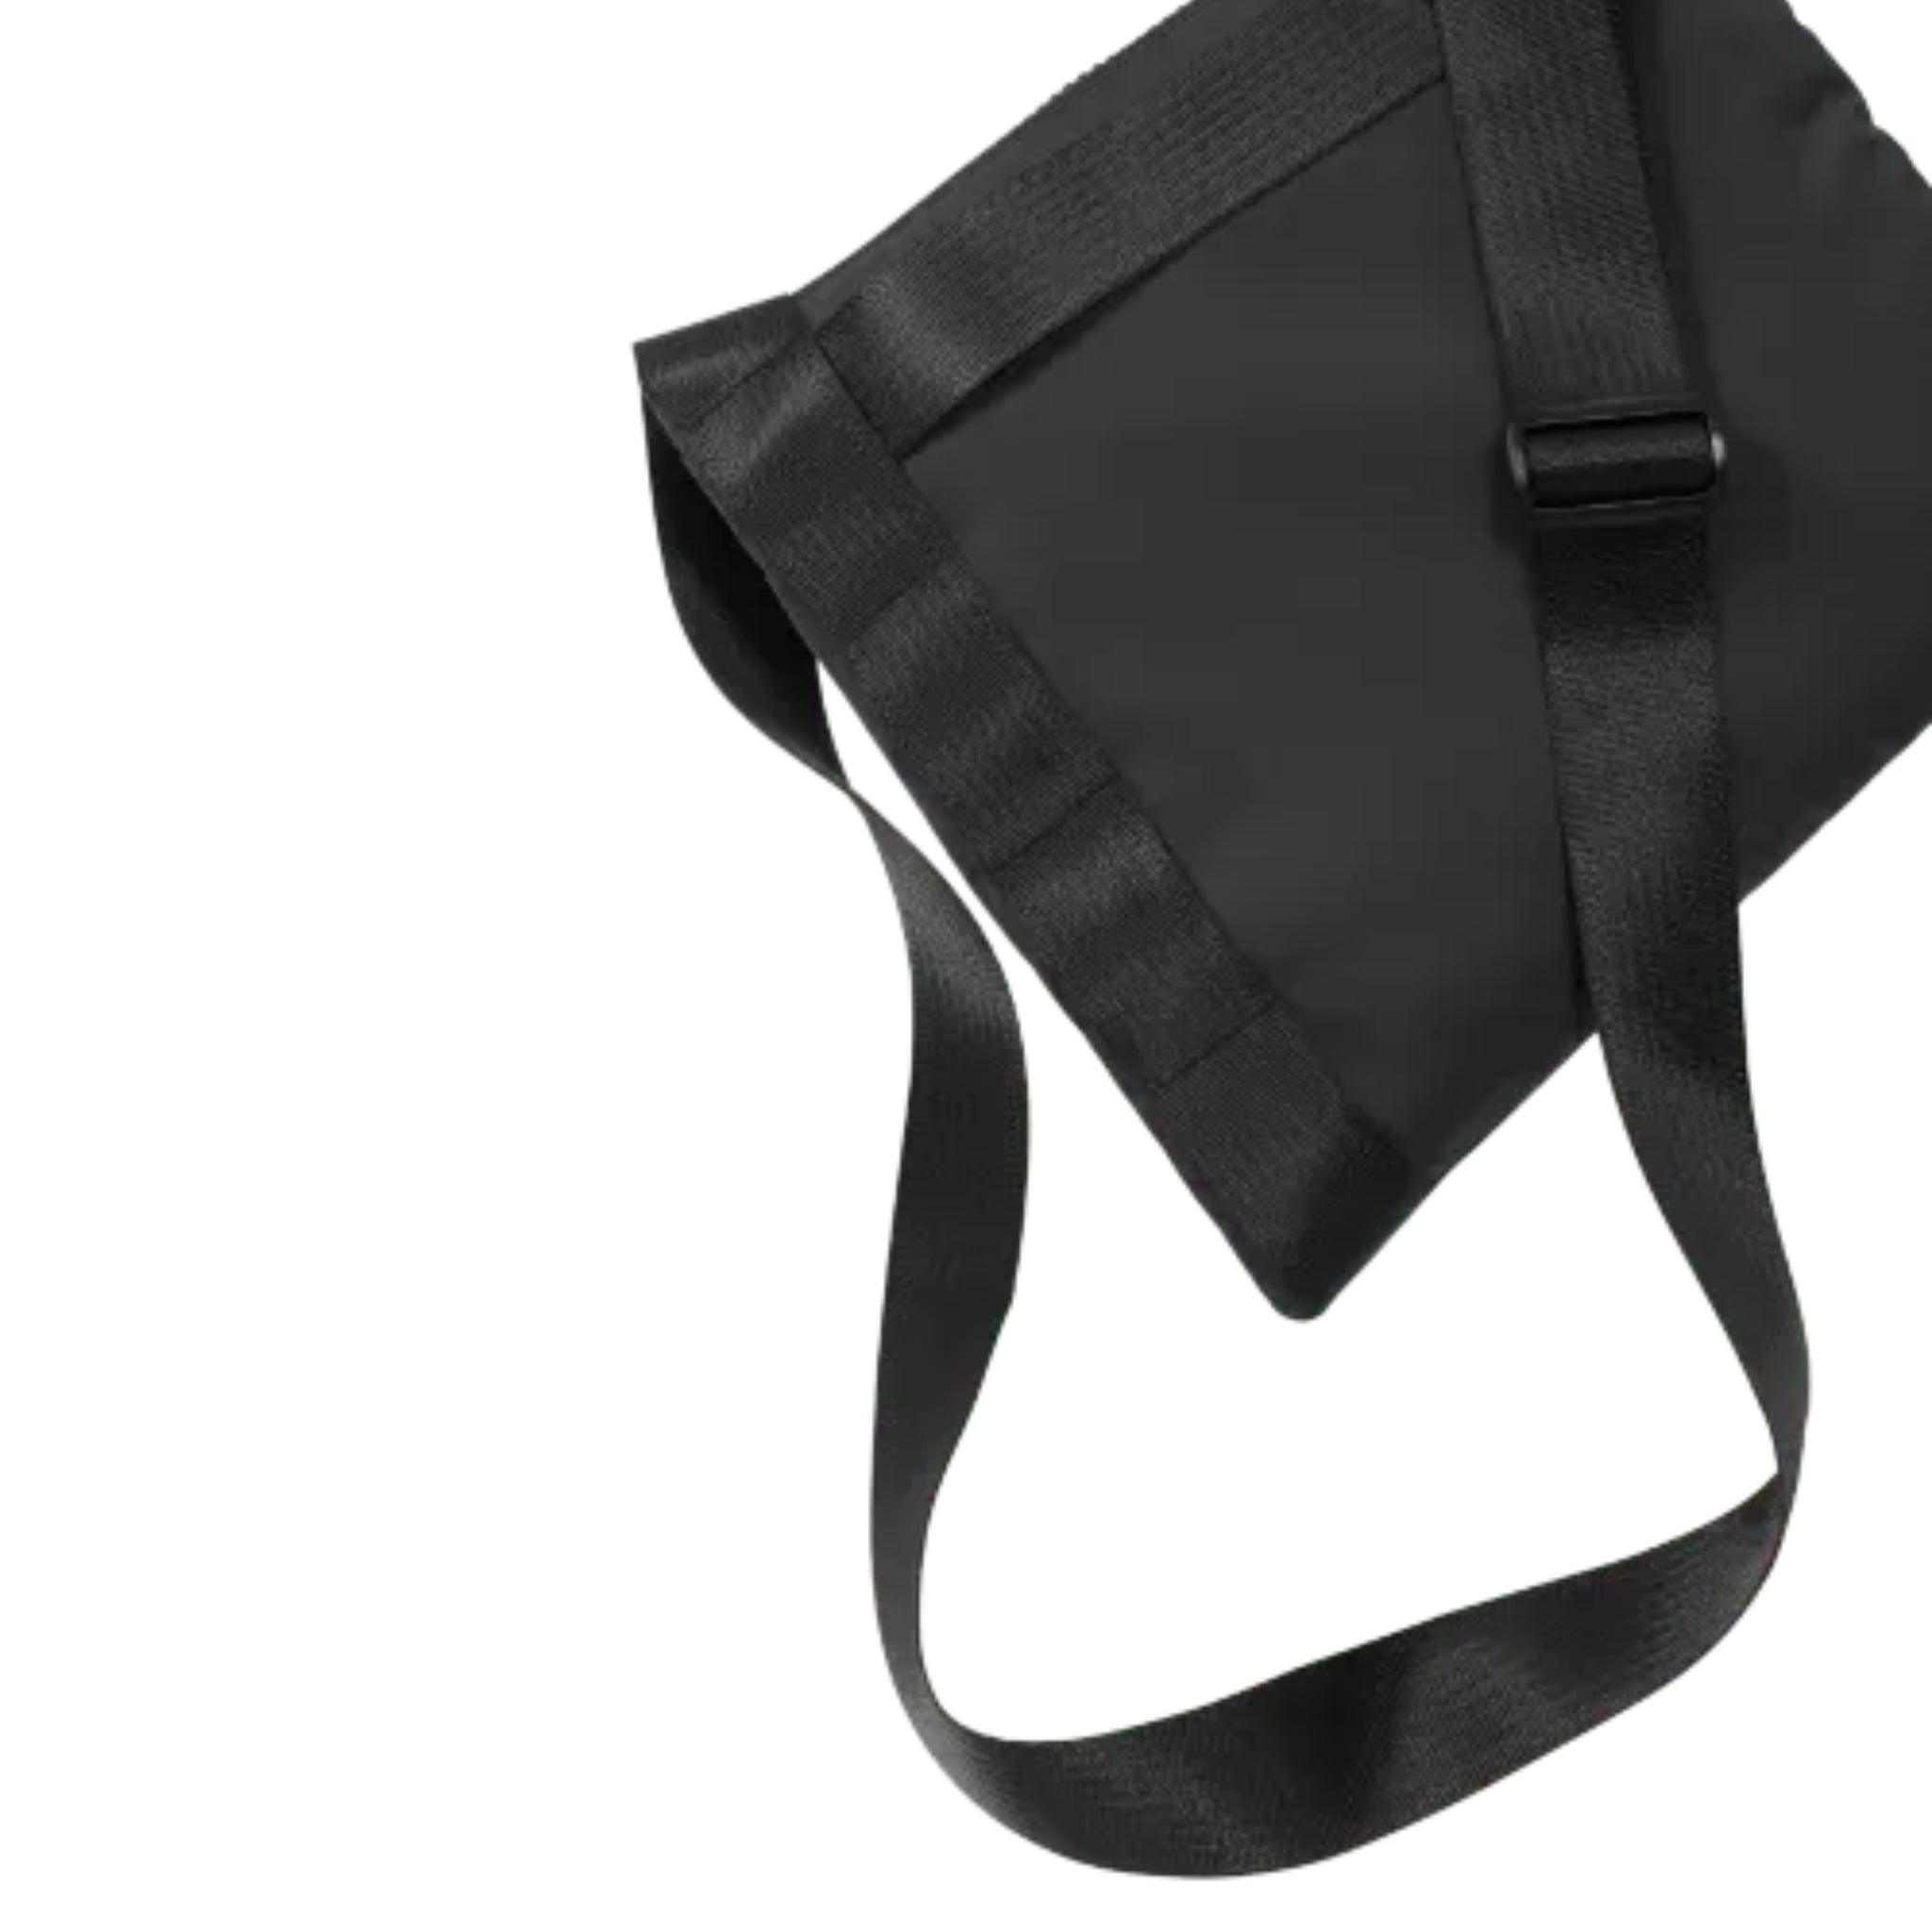 Close up of the ANDO satchel in black upcycled fishnets (econyl). Product shown at the front/center of a white background